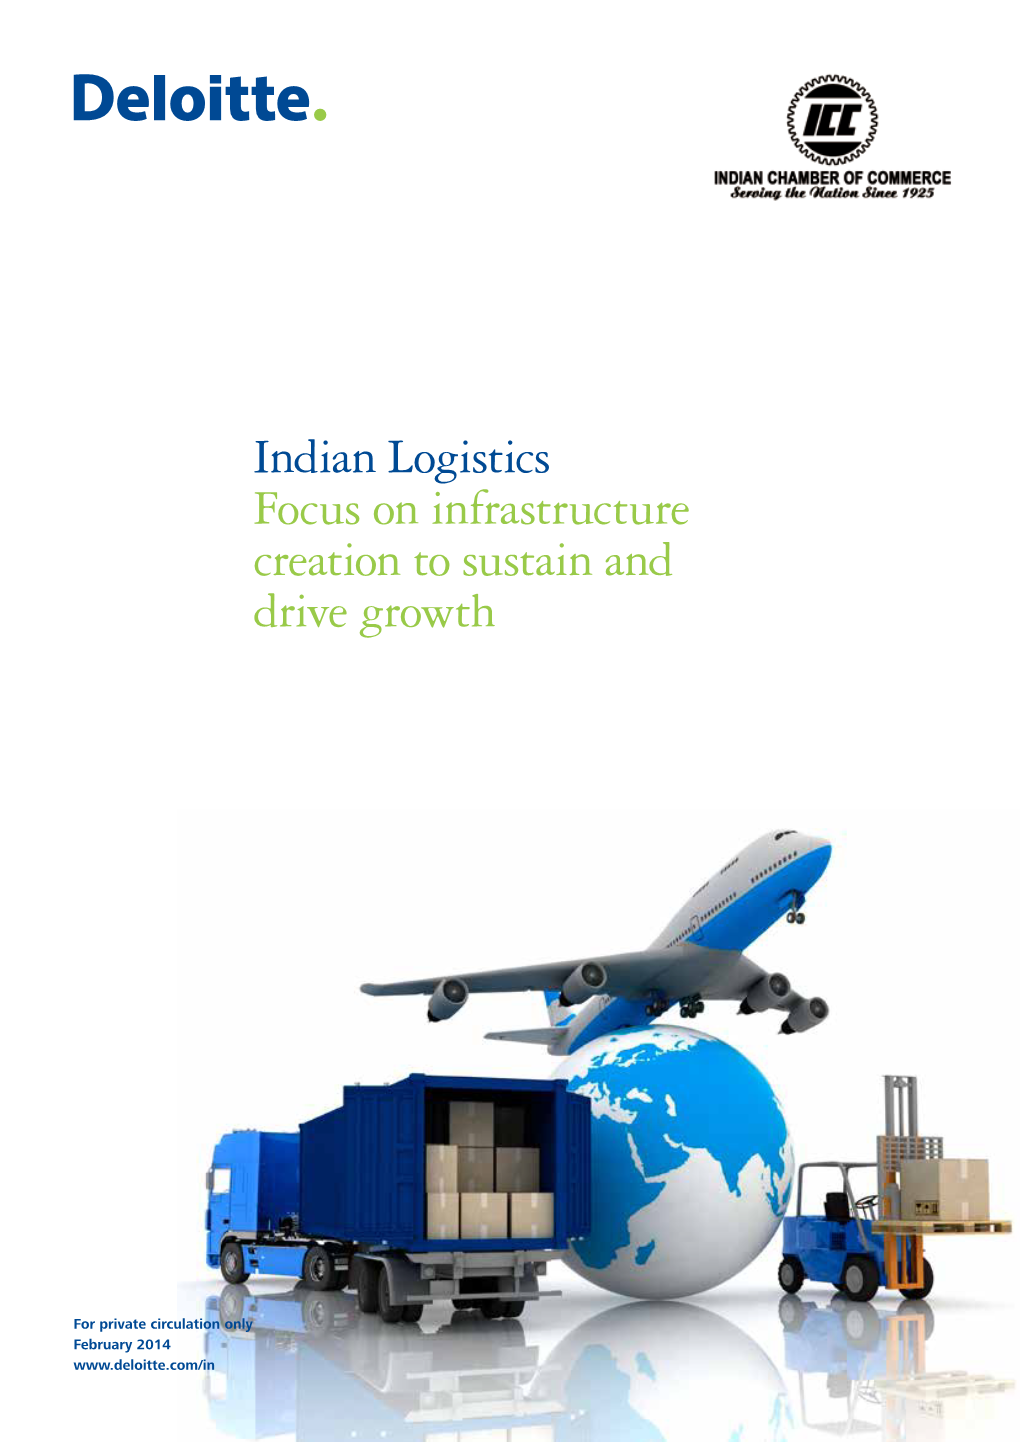 Indian Logistics Focus on Infrastructure Creation to Sustain and Drive Growth